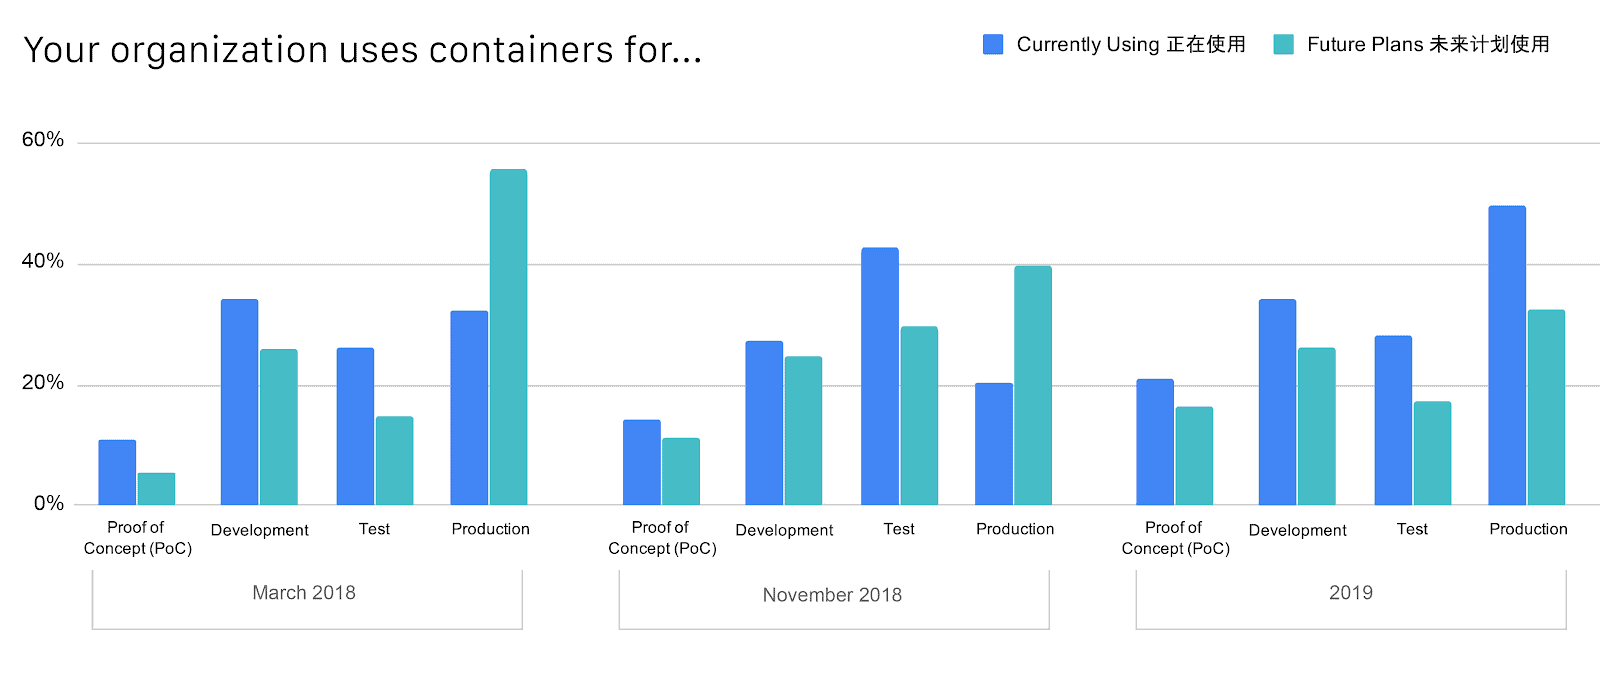 Bar chart showing percentage of organization uses containers for PoC, development, test, and production in March 2018, November 2018, and 2019